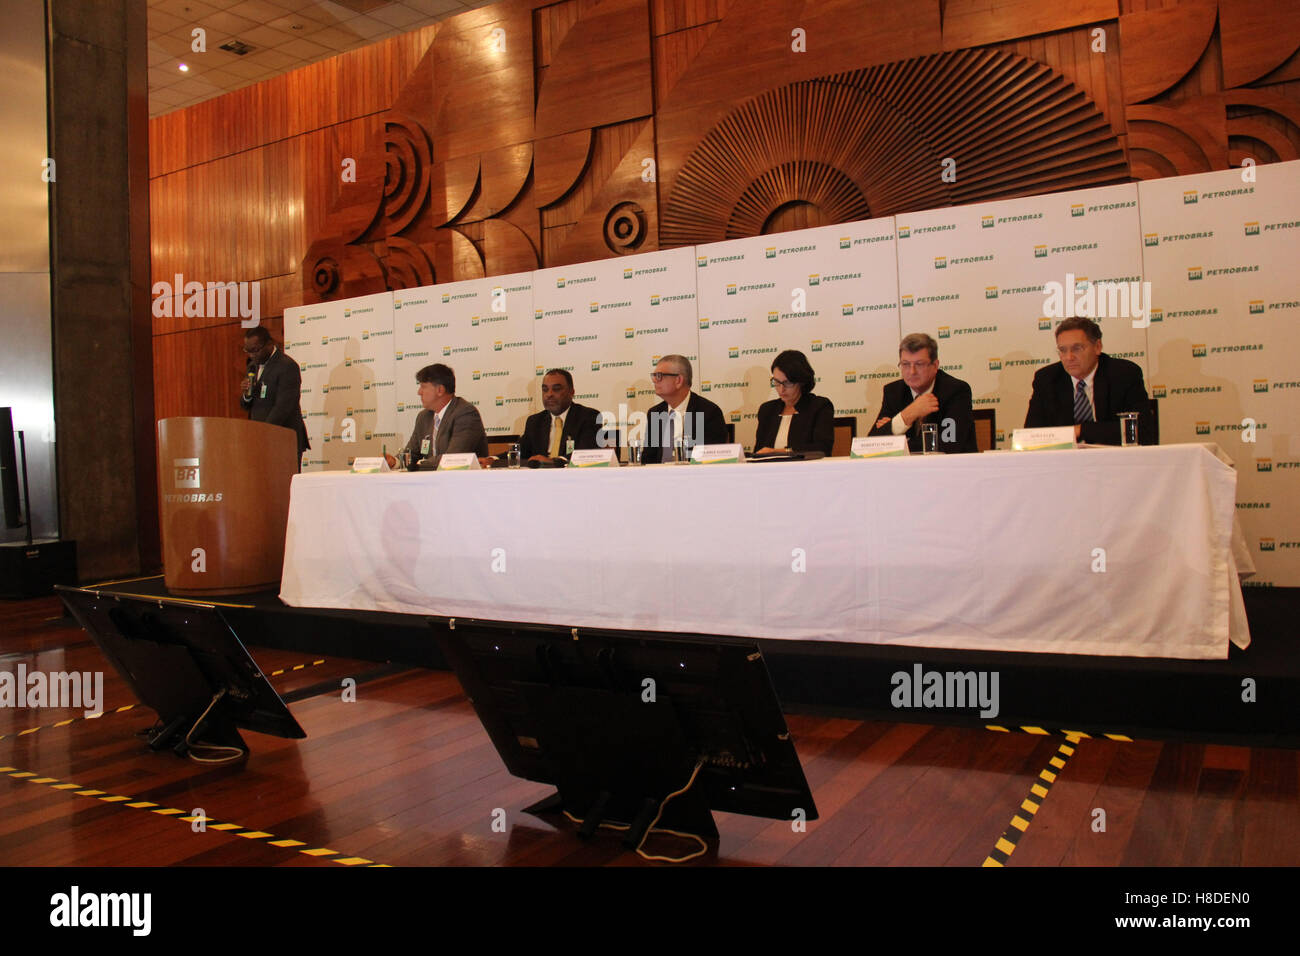 Rio de Janeiro, Brazil. 10th November, 2016. Petrobras' Board of Directors presents operating and financial results for the third quarter of 2016 at a press conference held at the company's headquarters building, in Rio de Janeiro Downtown. Participated in the press conference: João Elek, Roberto Moro, Solange Guedes, Ivan Monteiro, José Celestino and Hugo Repsold Júnior. Credit:  Luiz Souza/Alamy Live News Stock Photo